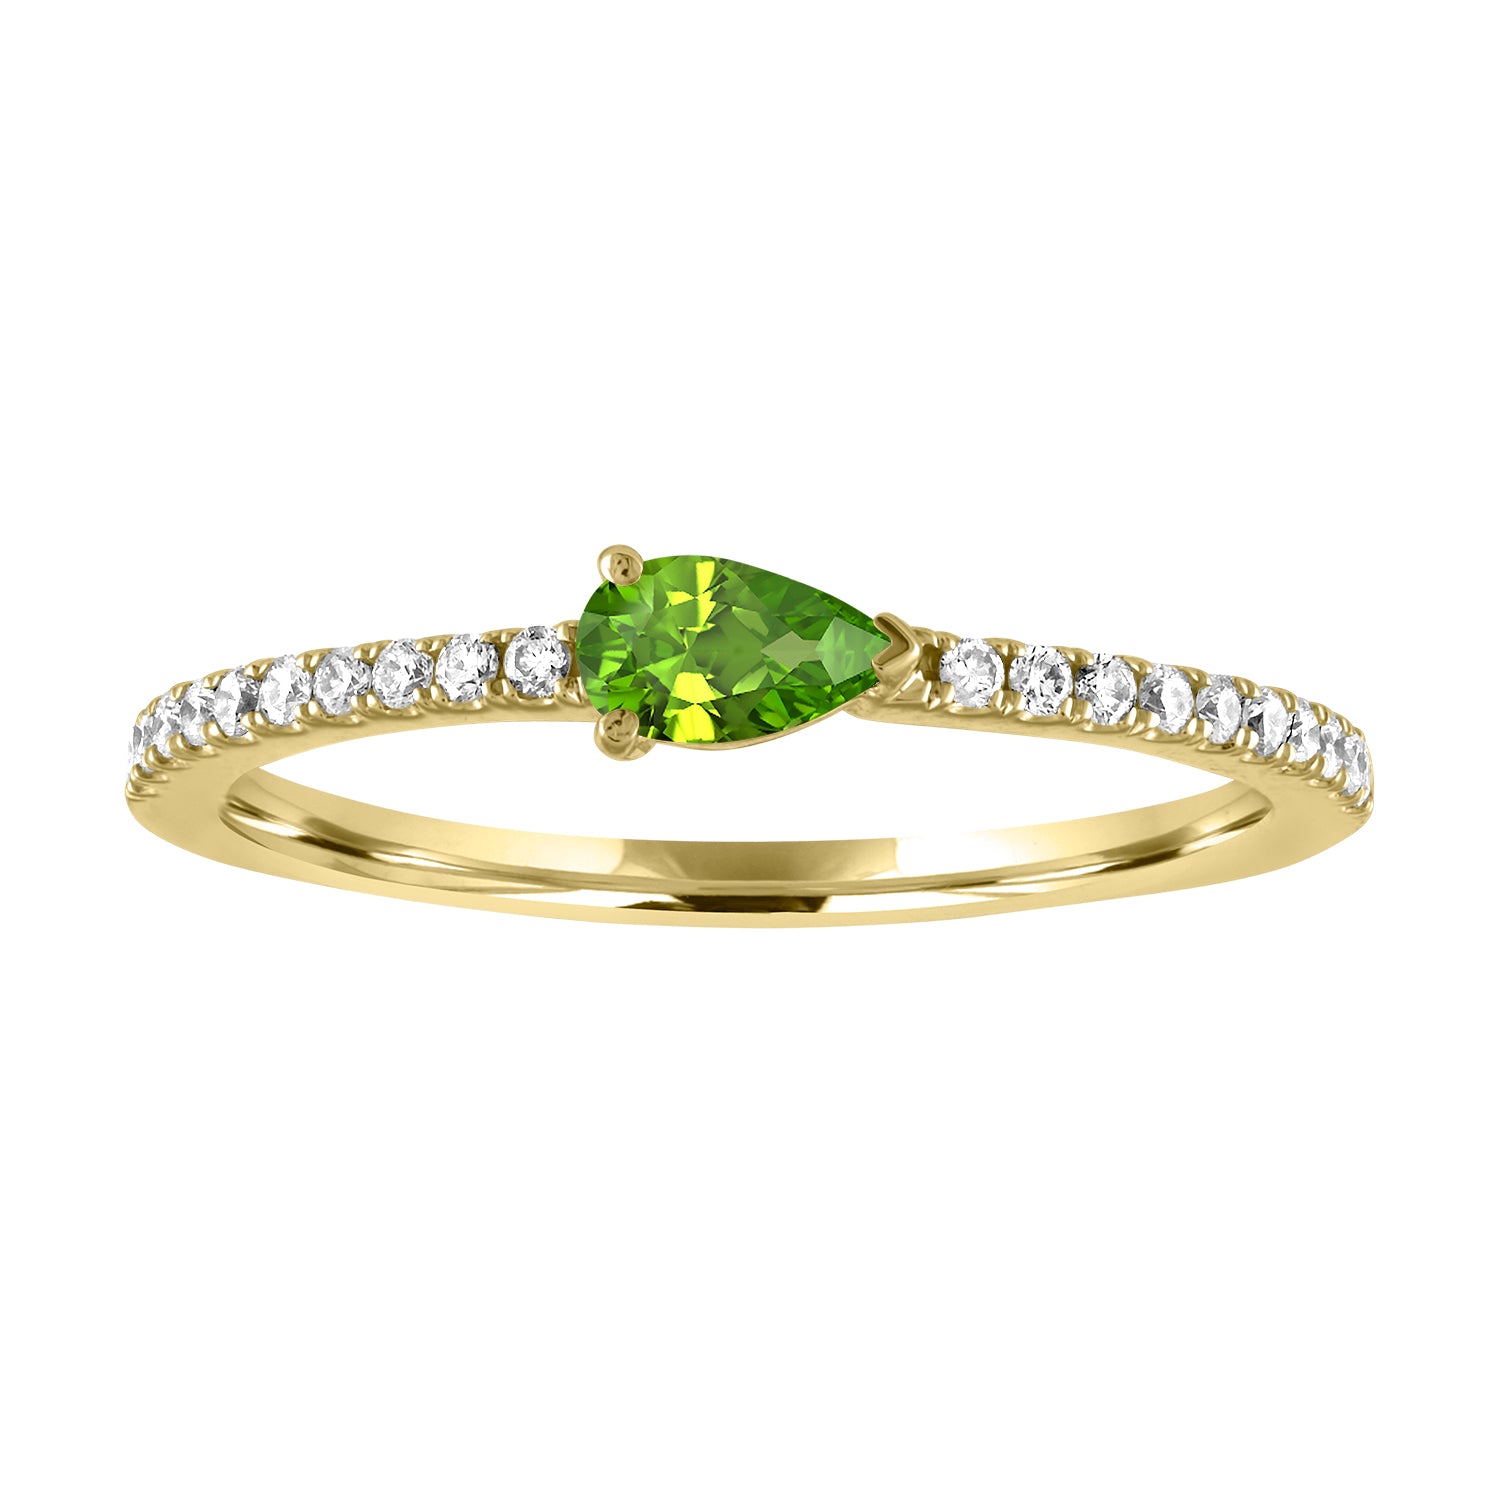 Yellow gold skinny band with a pear shaped peridot in the center and round diamonds on the shank. 